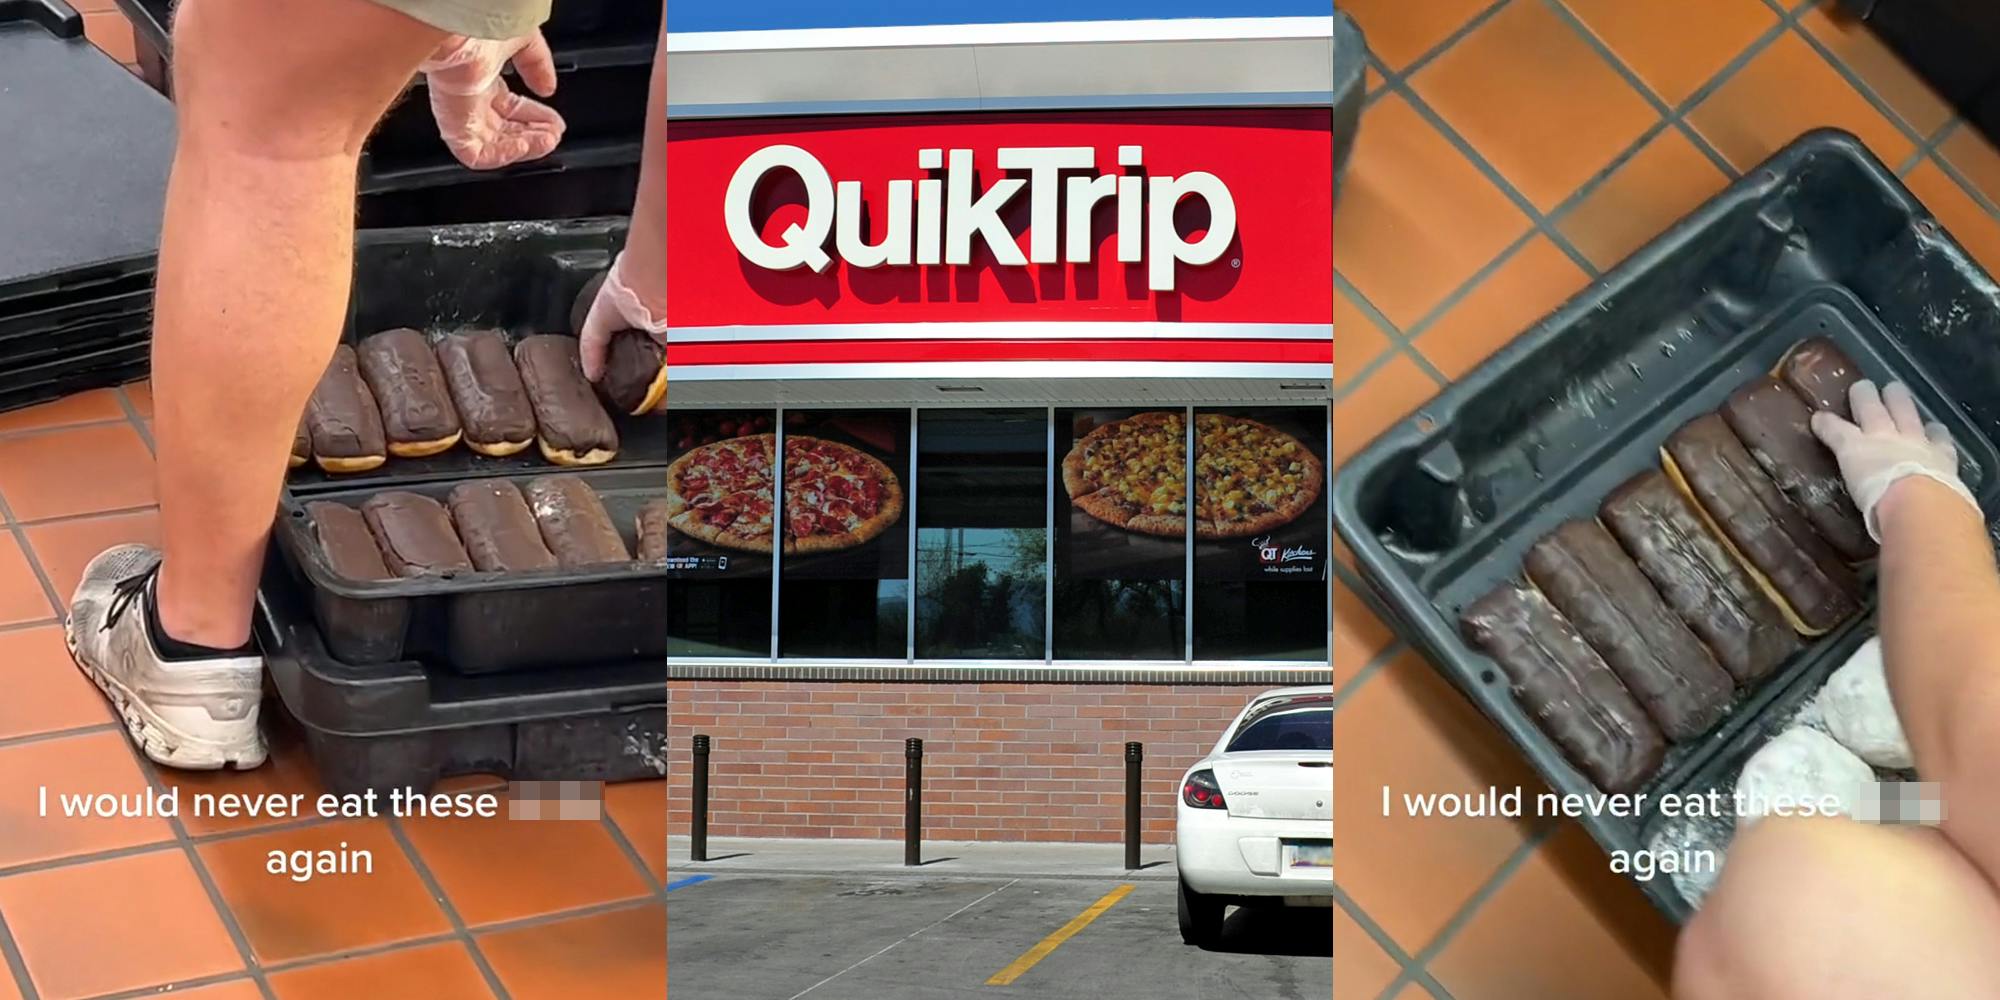 man with gloves on taking donuts out of black bin with caption "I would never eat these blank again" (l) QuikTrip building with sign and parking lot (c) man with gloves on taking donuts out of black bin with caption "I would never eat these blank again" (r)